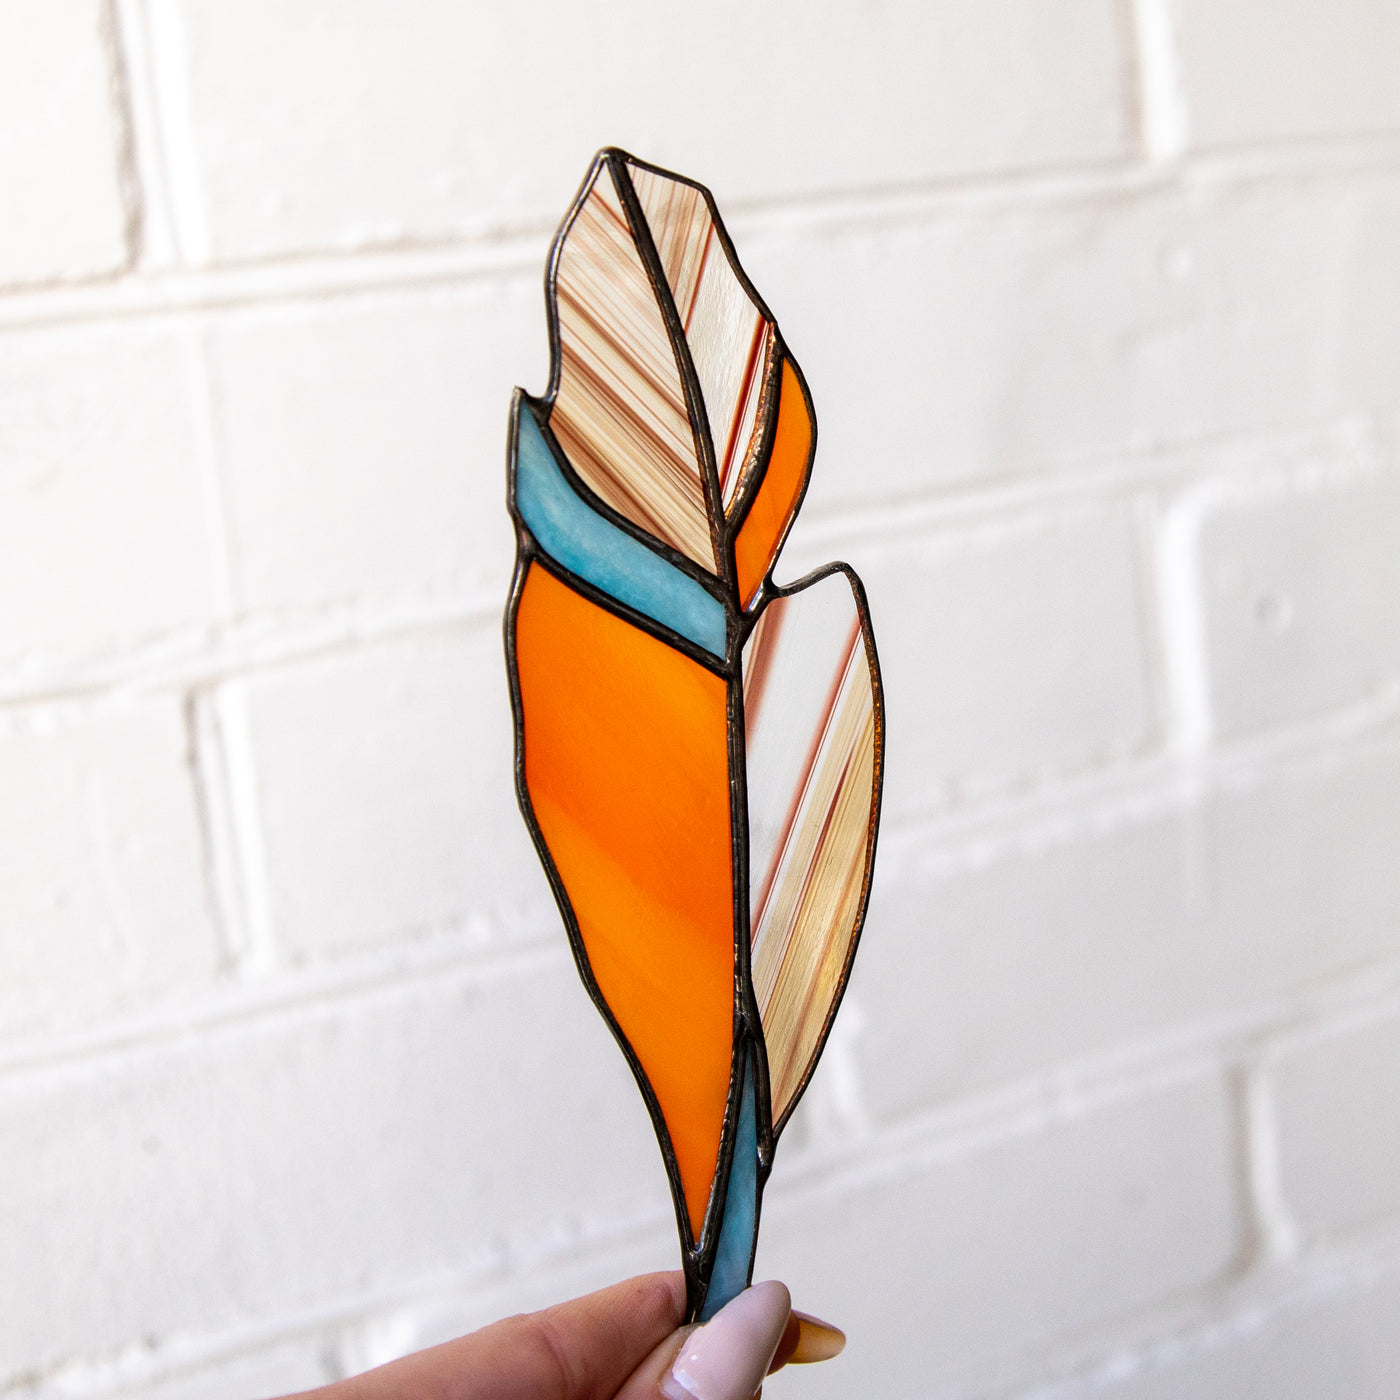 Stained glass orange feather suncatcher with blue parts and blotchiness